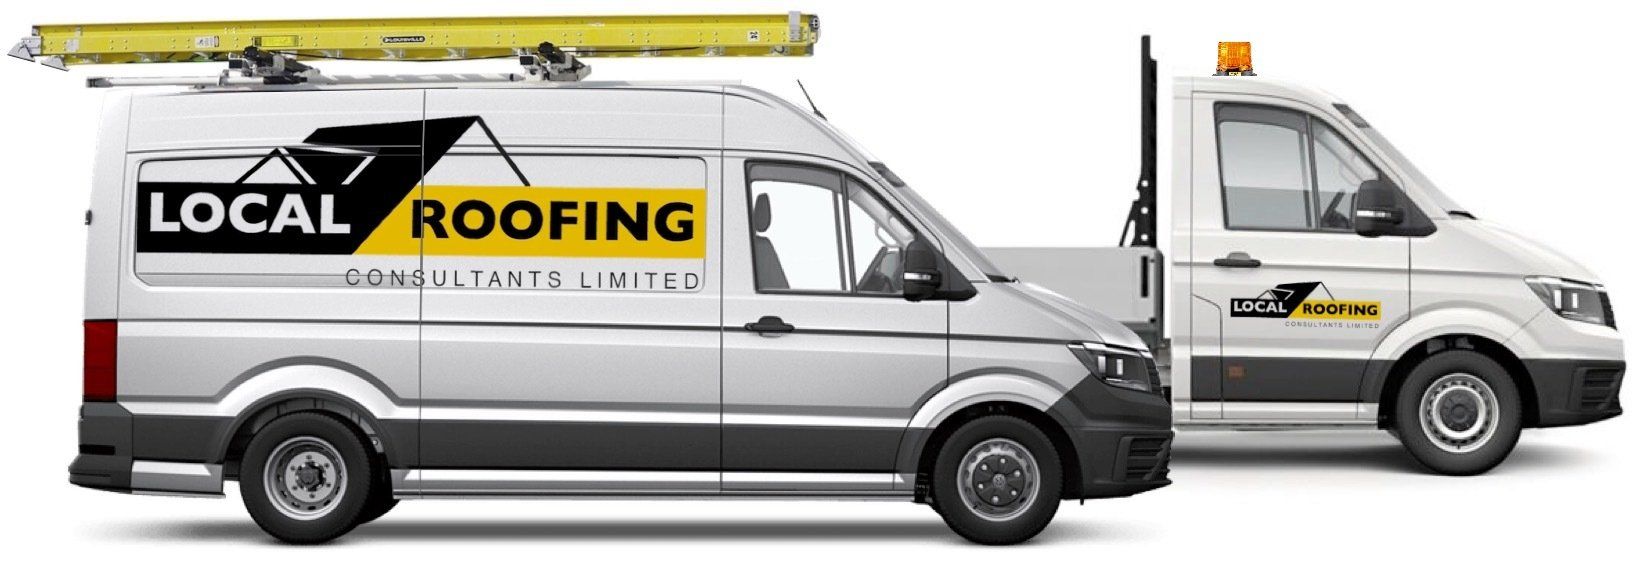 Local Roofing Consultants Limited work in Harrow and throughout the London area